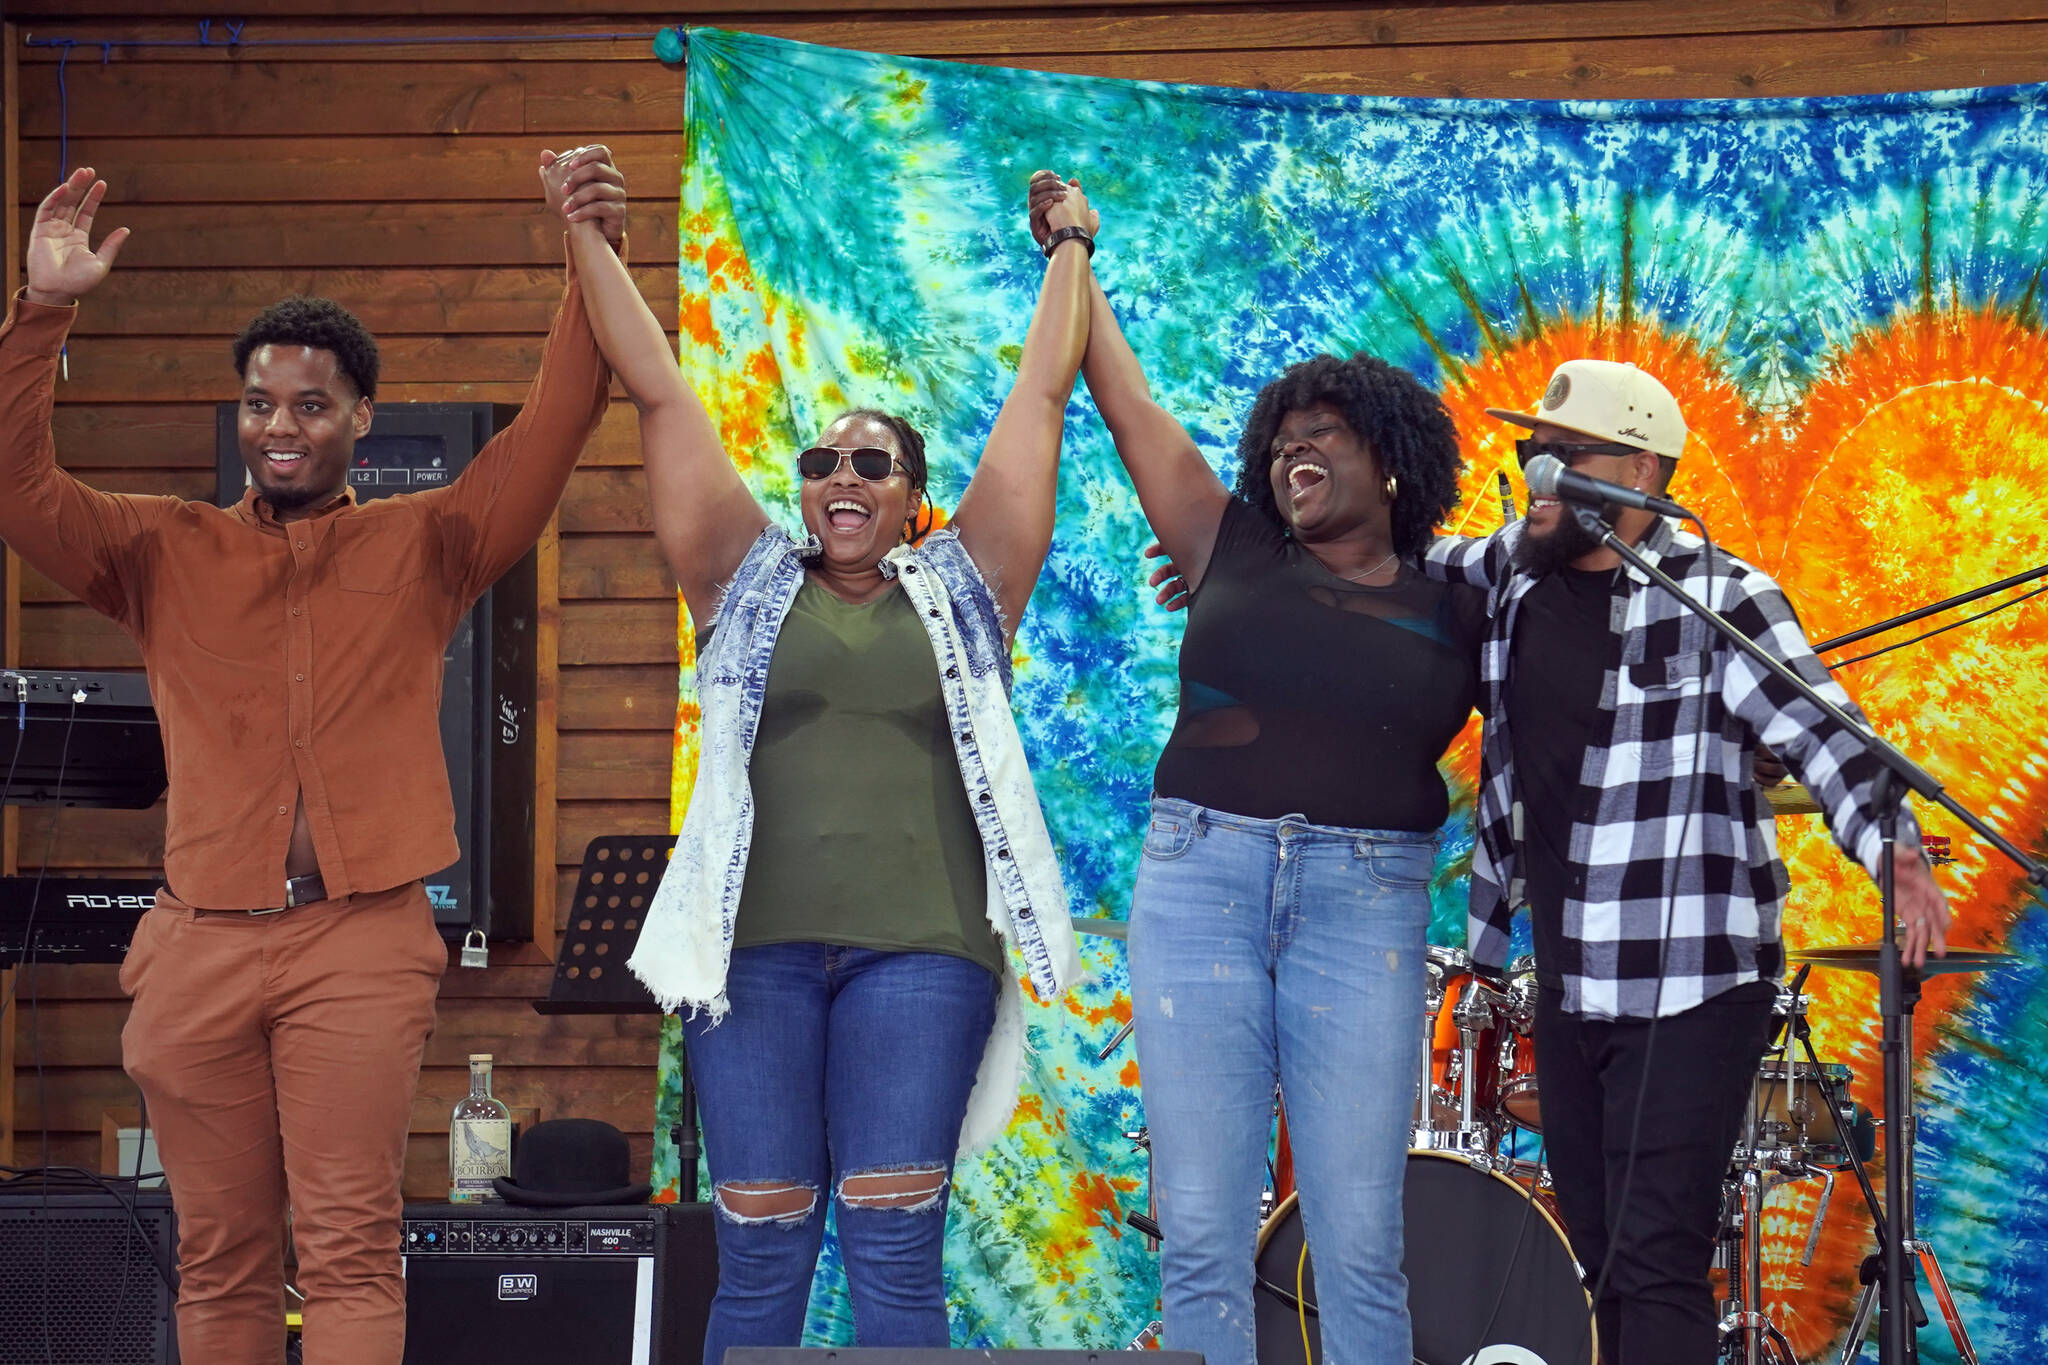 The members of Wasabi Black stand and bow at the end of their set during the Soldotna Music Series at Soldotna Creek Park in Soldotna, Alaska, on Wednesday, June 21, 2023. (Jake Dye/Peninsula Clarion)